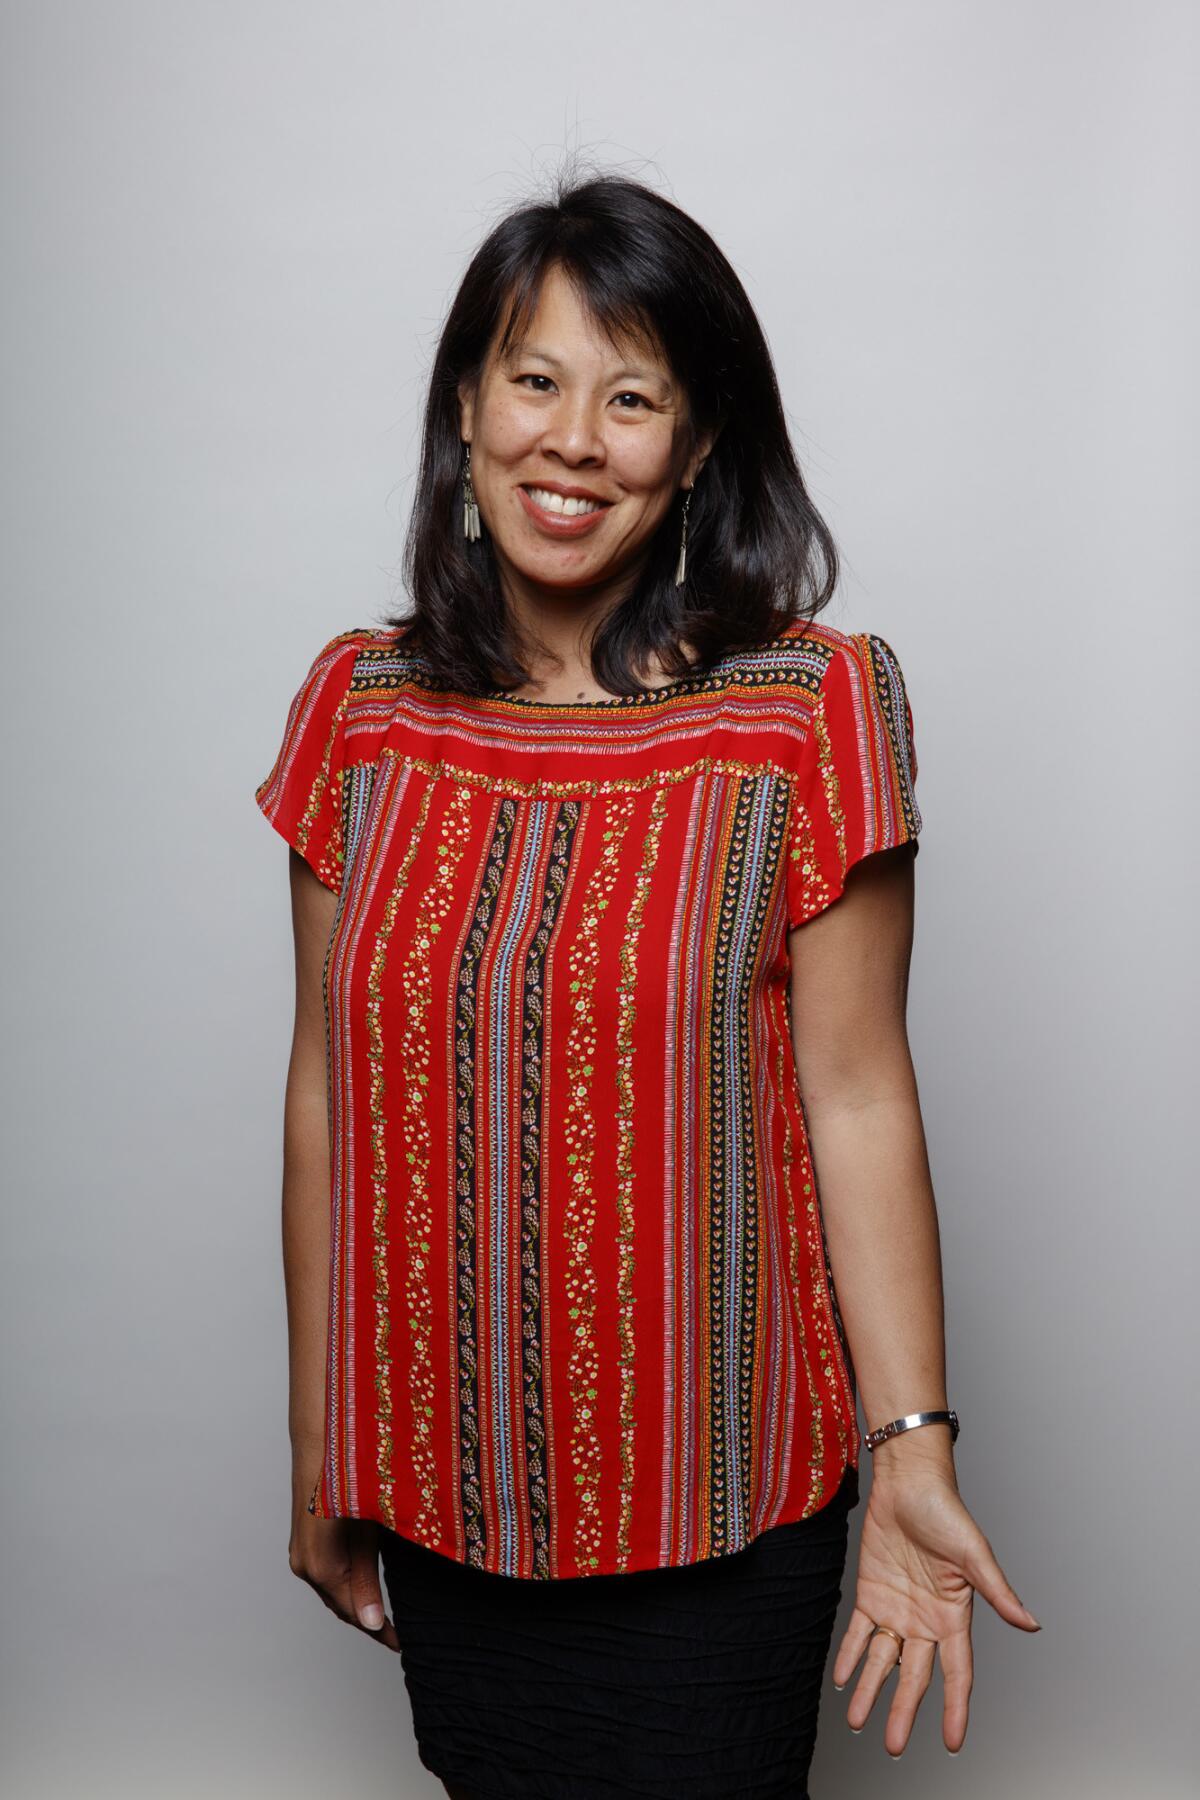 Mira T. Lee, author of "Everything Here is Beautiful."